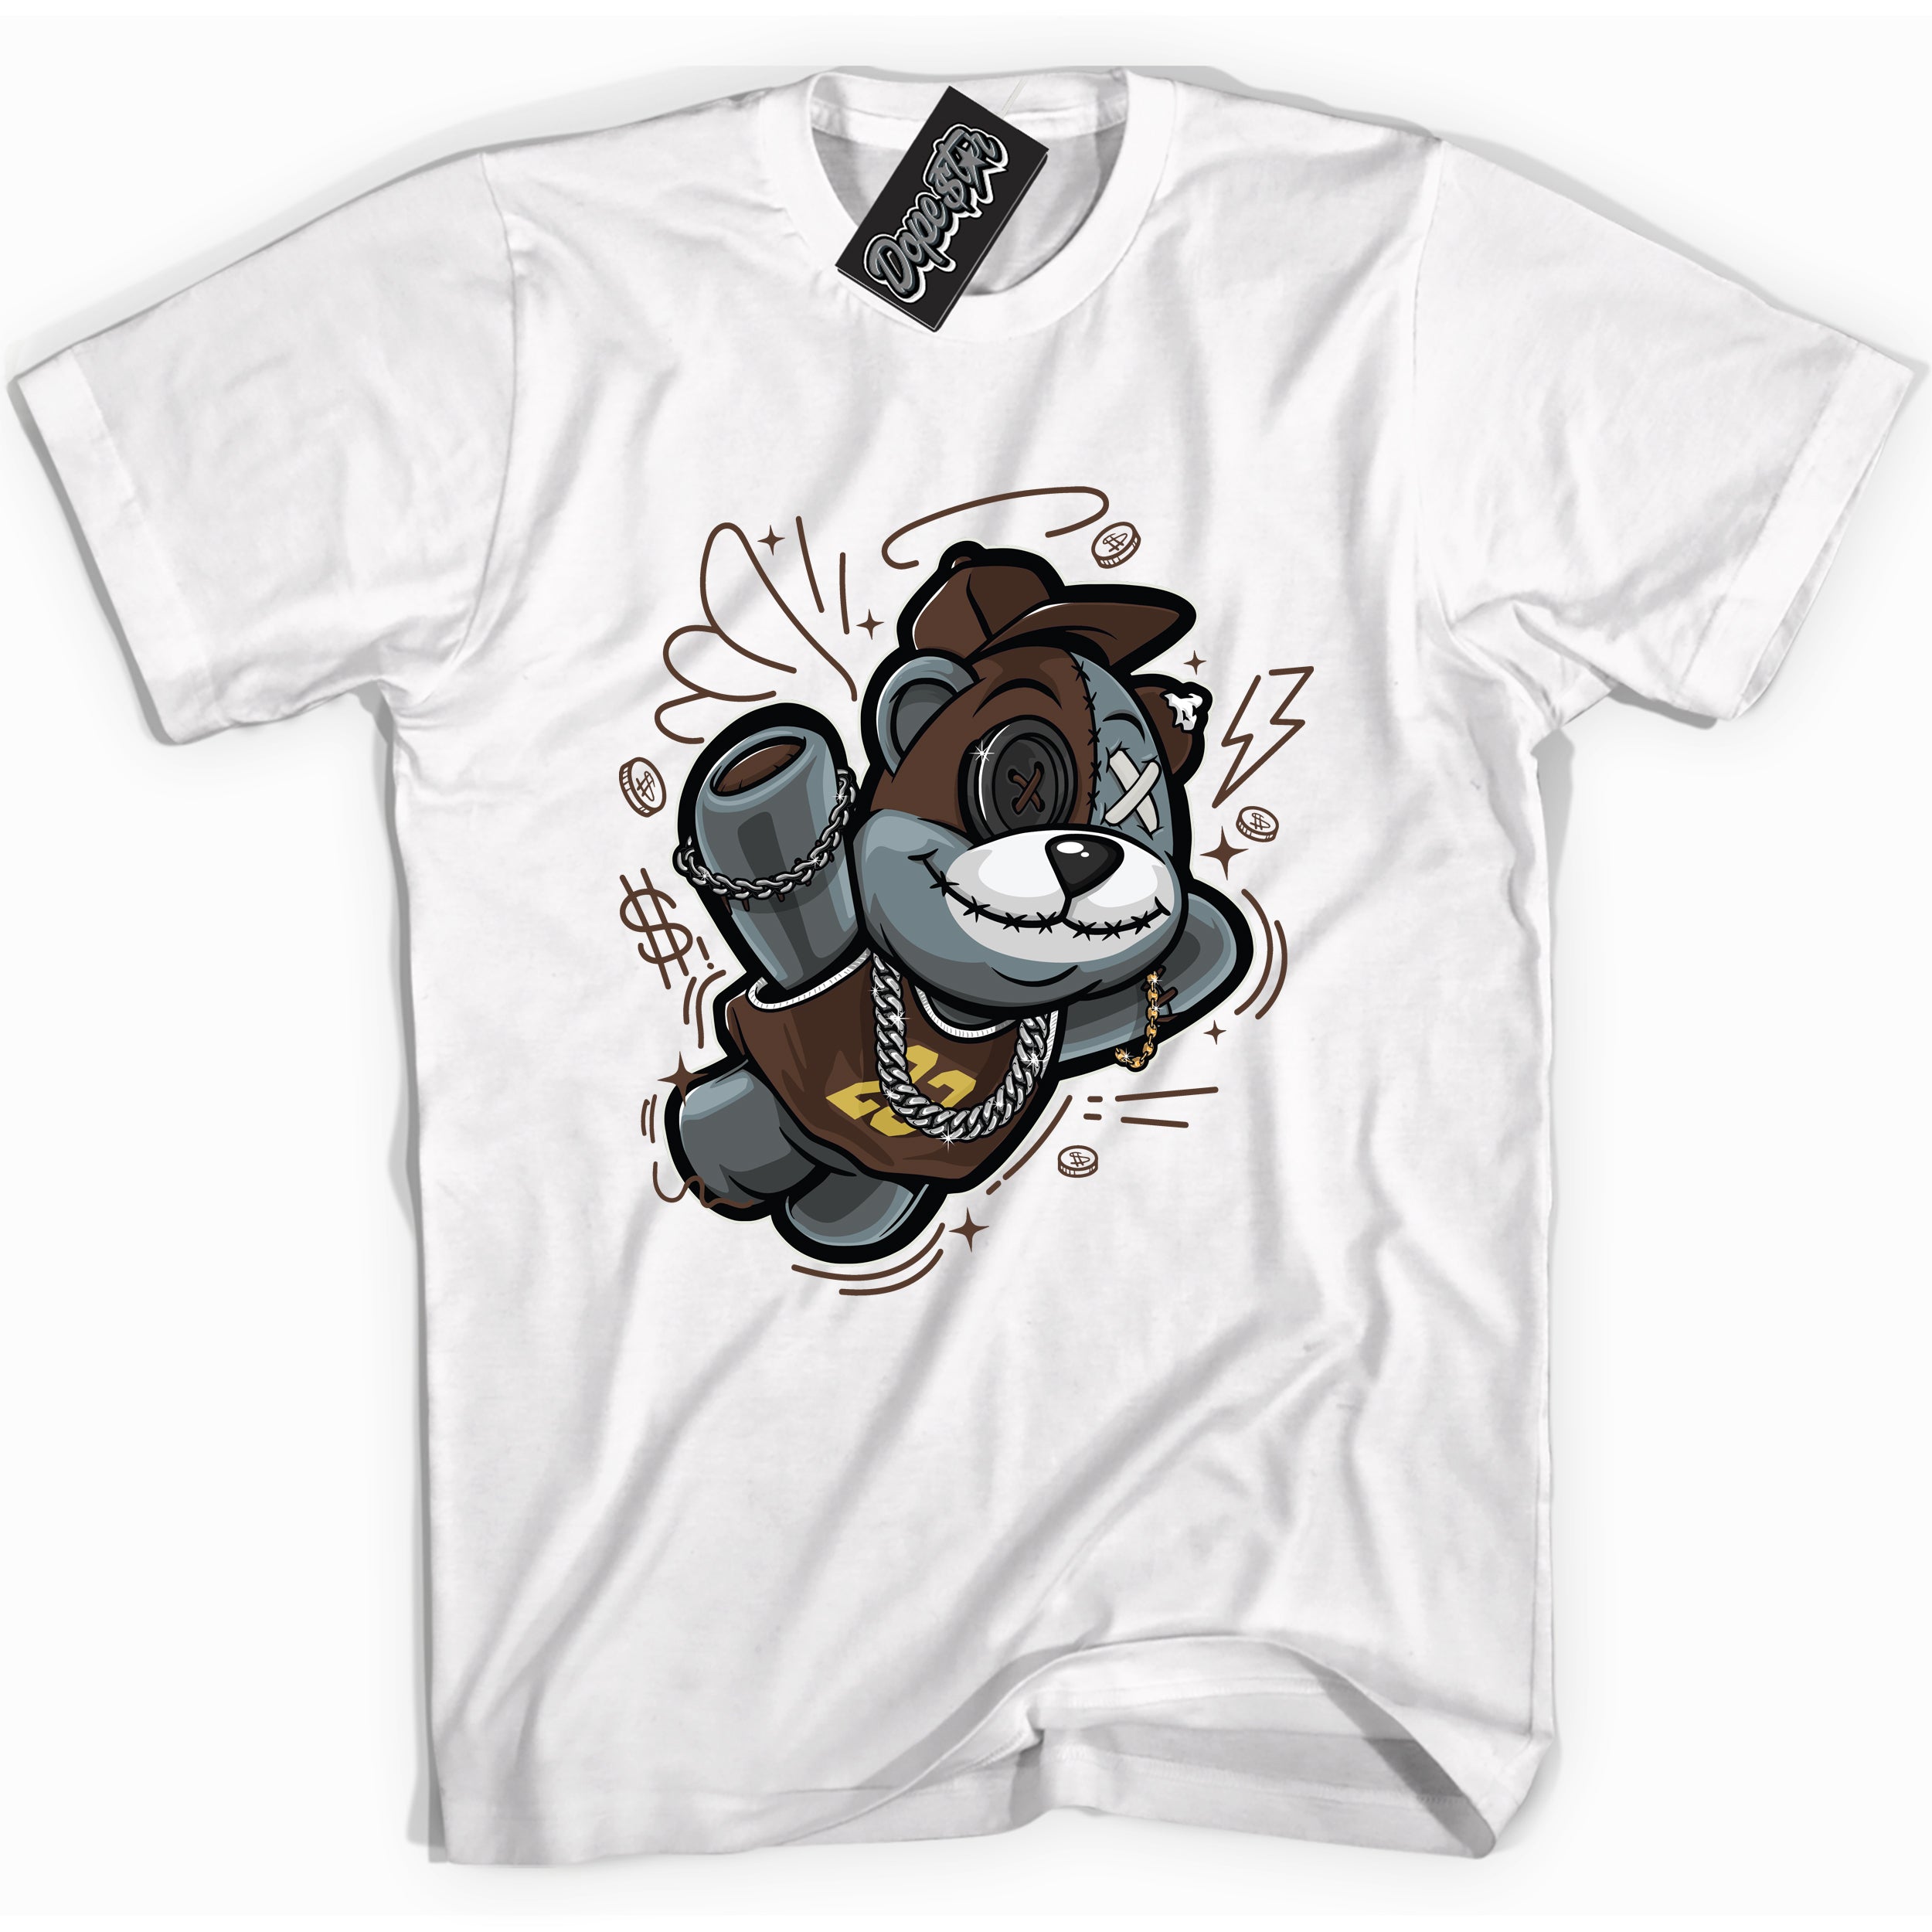 Cool White graphic tee with “ Slam Dunk Bear ” design, that perfectly matches Palomino 1s sneakers 